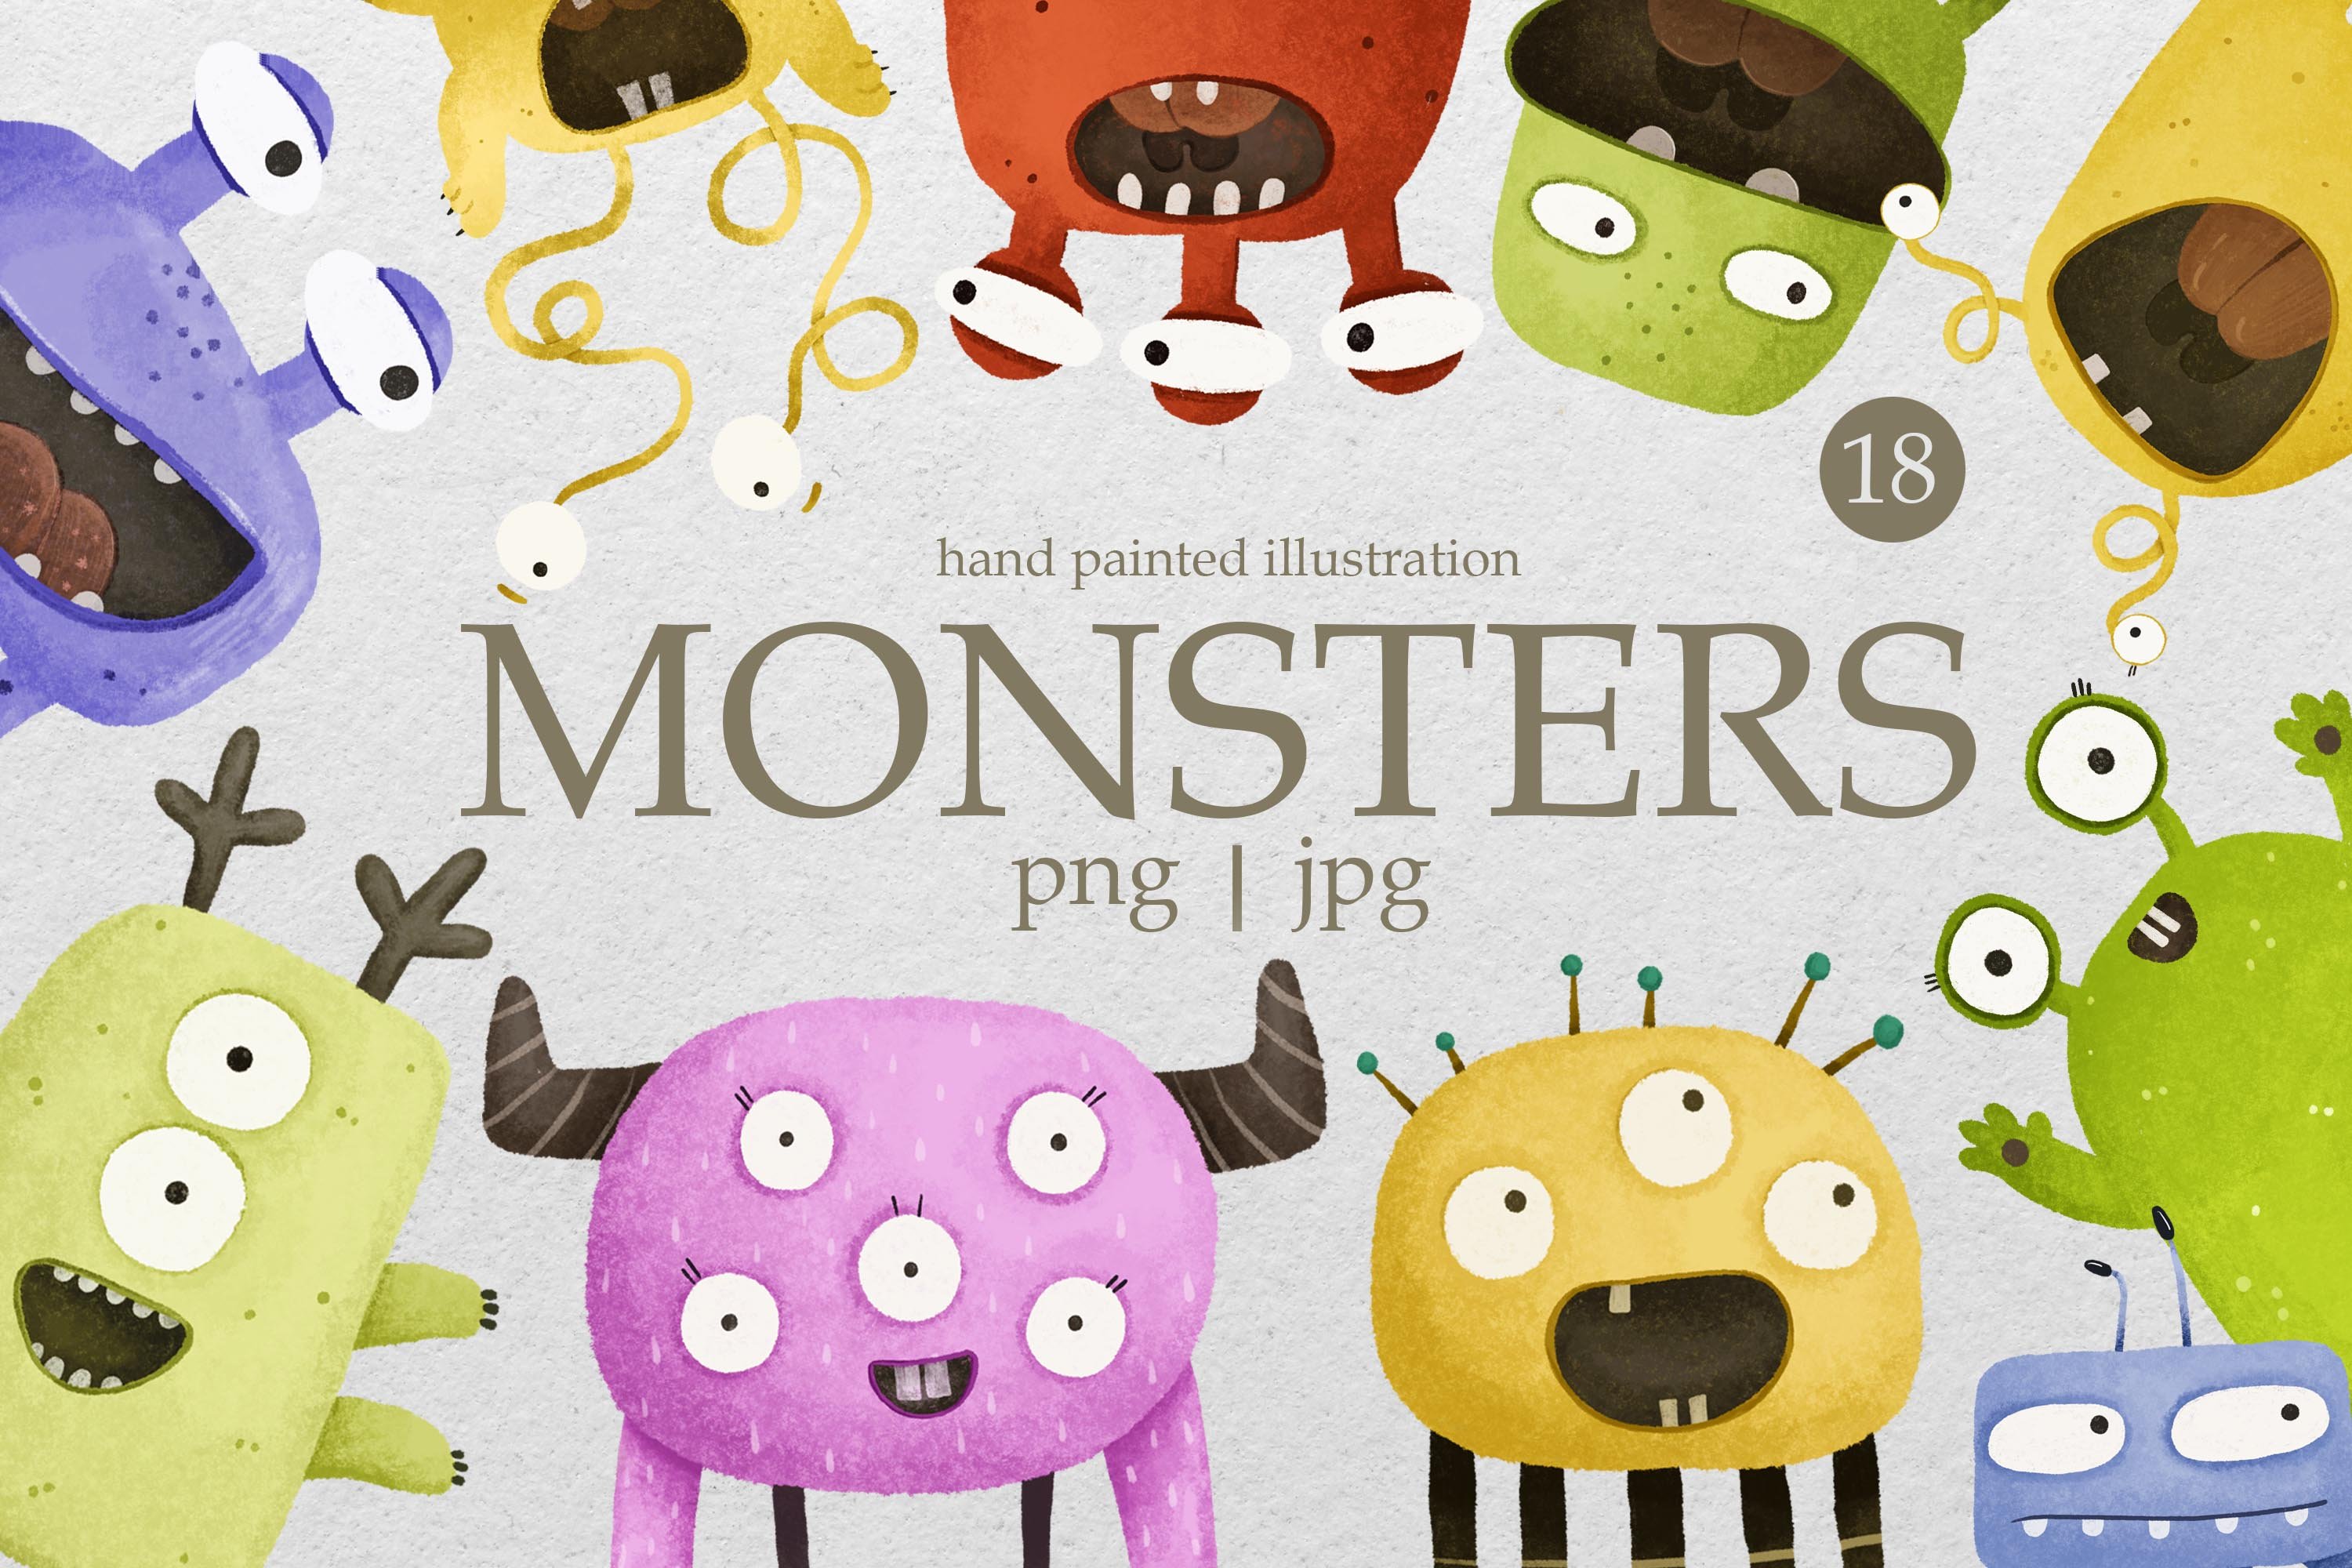 CARTOON MONSTER CHARACTERS cover image.